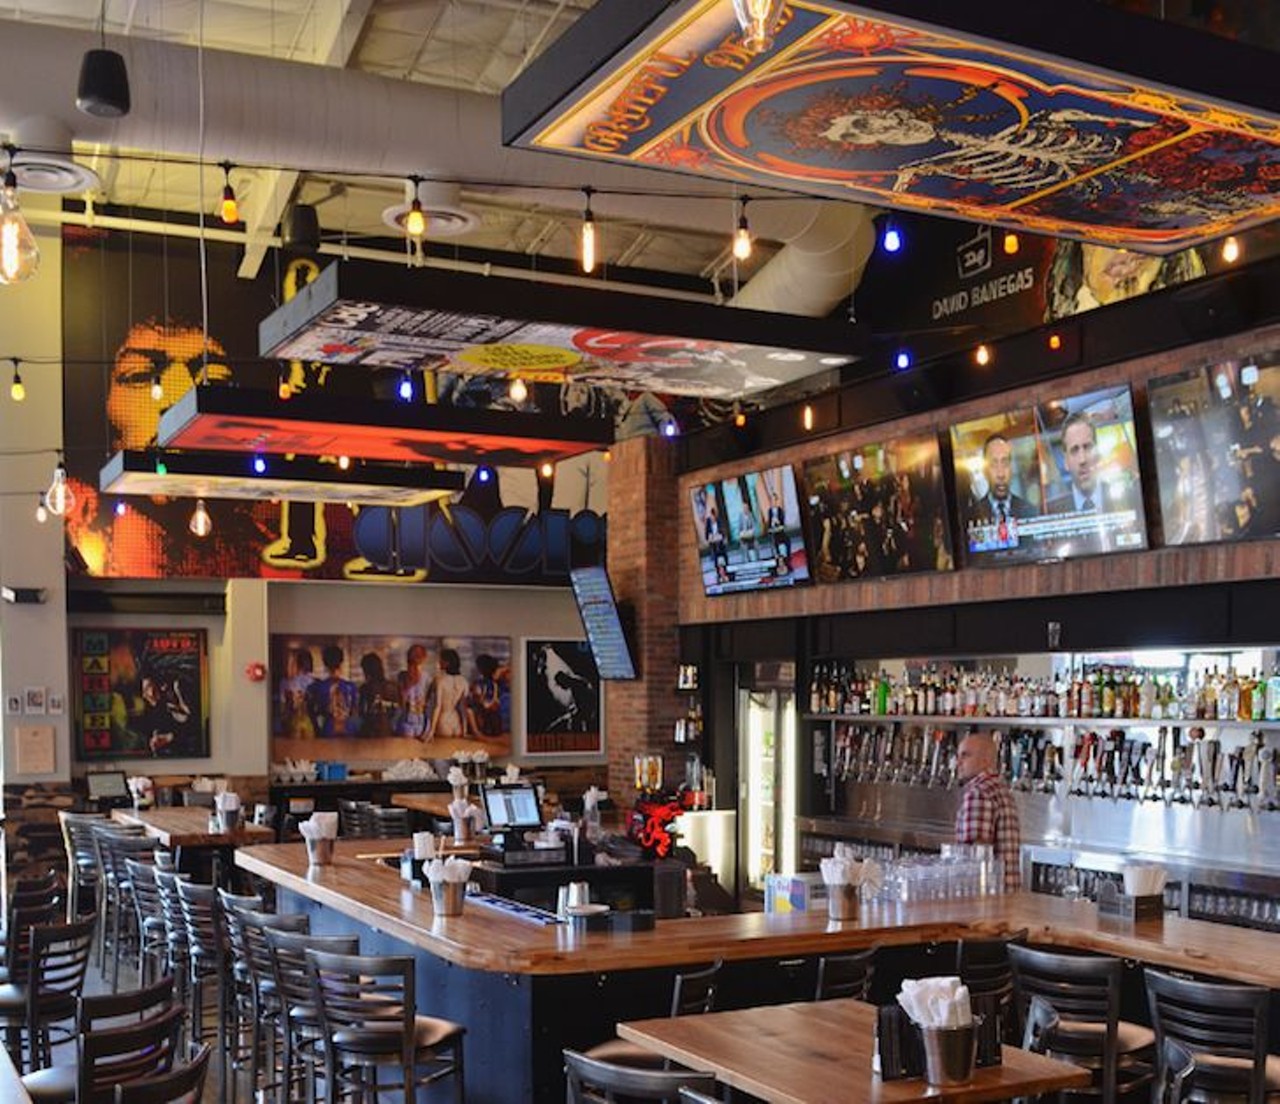 Rock & Brews
6897 S. Semoran Blvd., 407-367-2840
Gene Simmons and Paul Stanley brought their rockin' restaurant chain to the Lee Vista area. The burger and beer joint features an assortment of rock-themed decor, a "Great Wall of Rock," and a variety of music-themed artwork. The crazy-long list of beers, ciders and wines will make you want to rock and roll all night--and party every day.
Photo via rockandbrewsorlando/Instagram